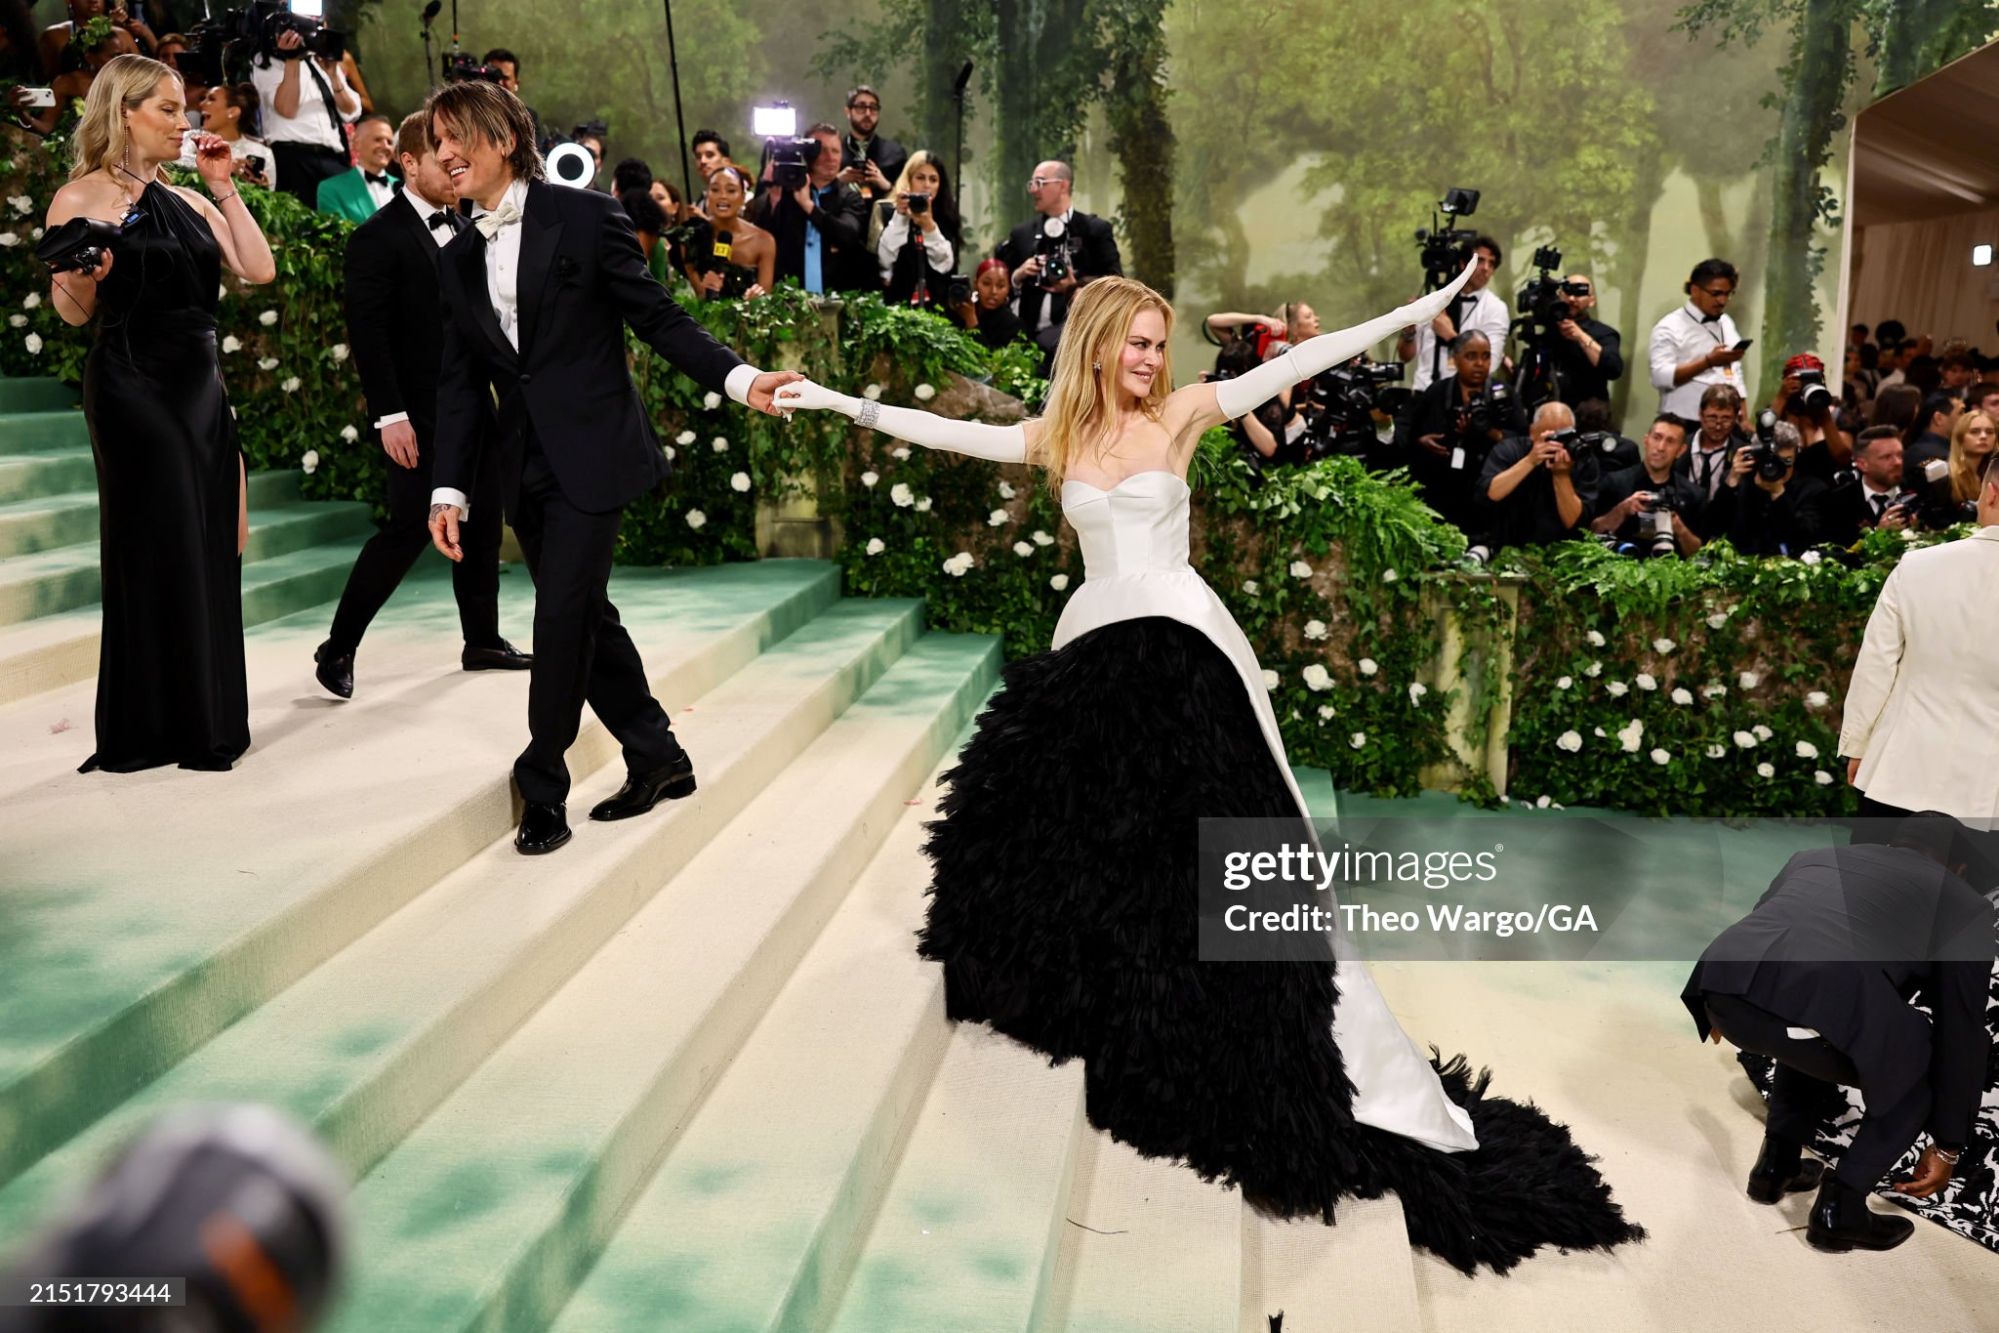 gettyimages-2151793444-2048x2048.jpg